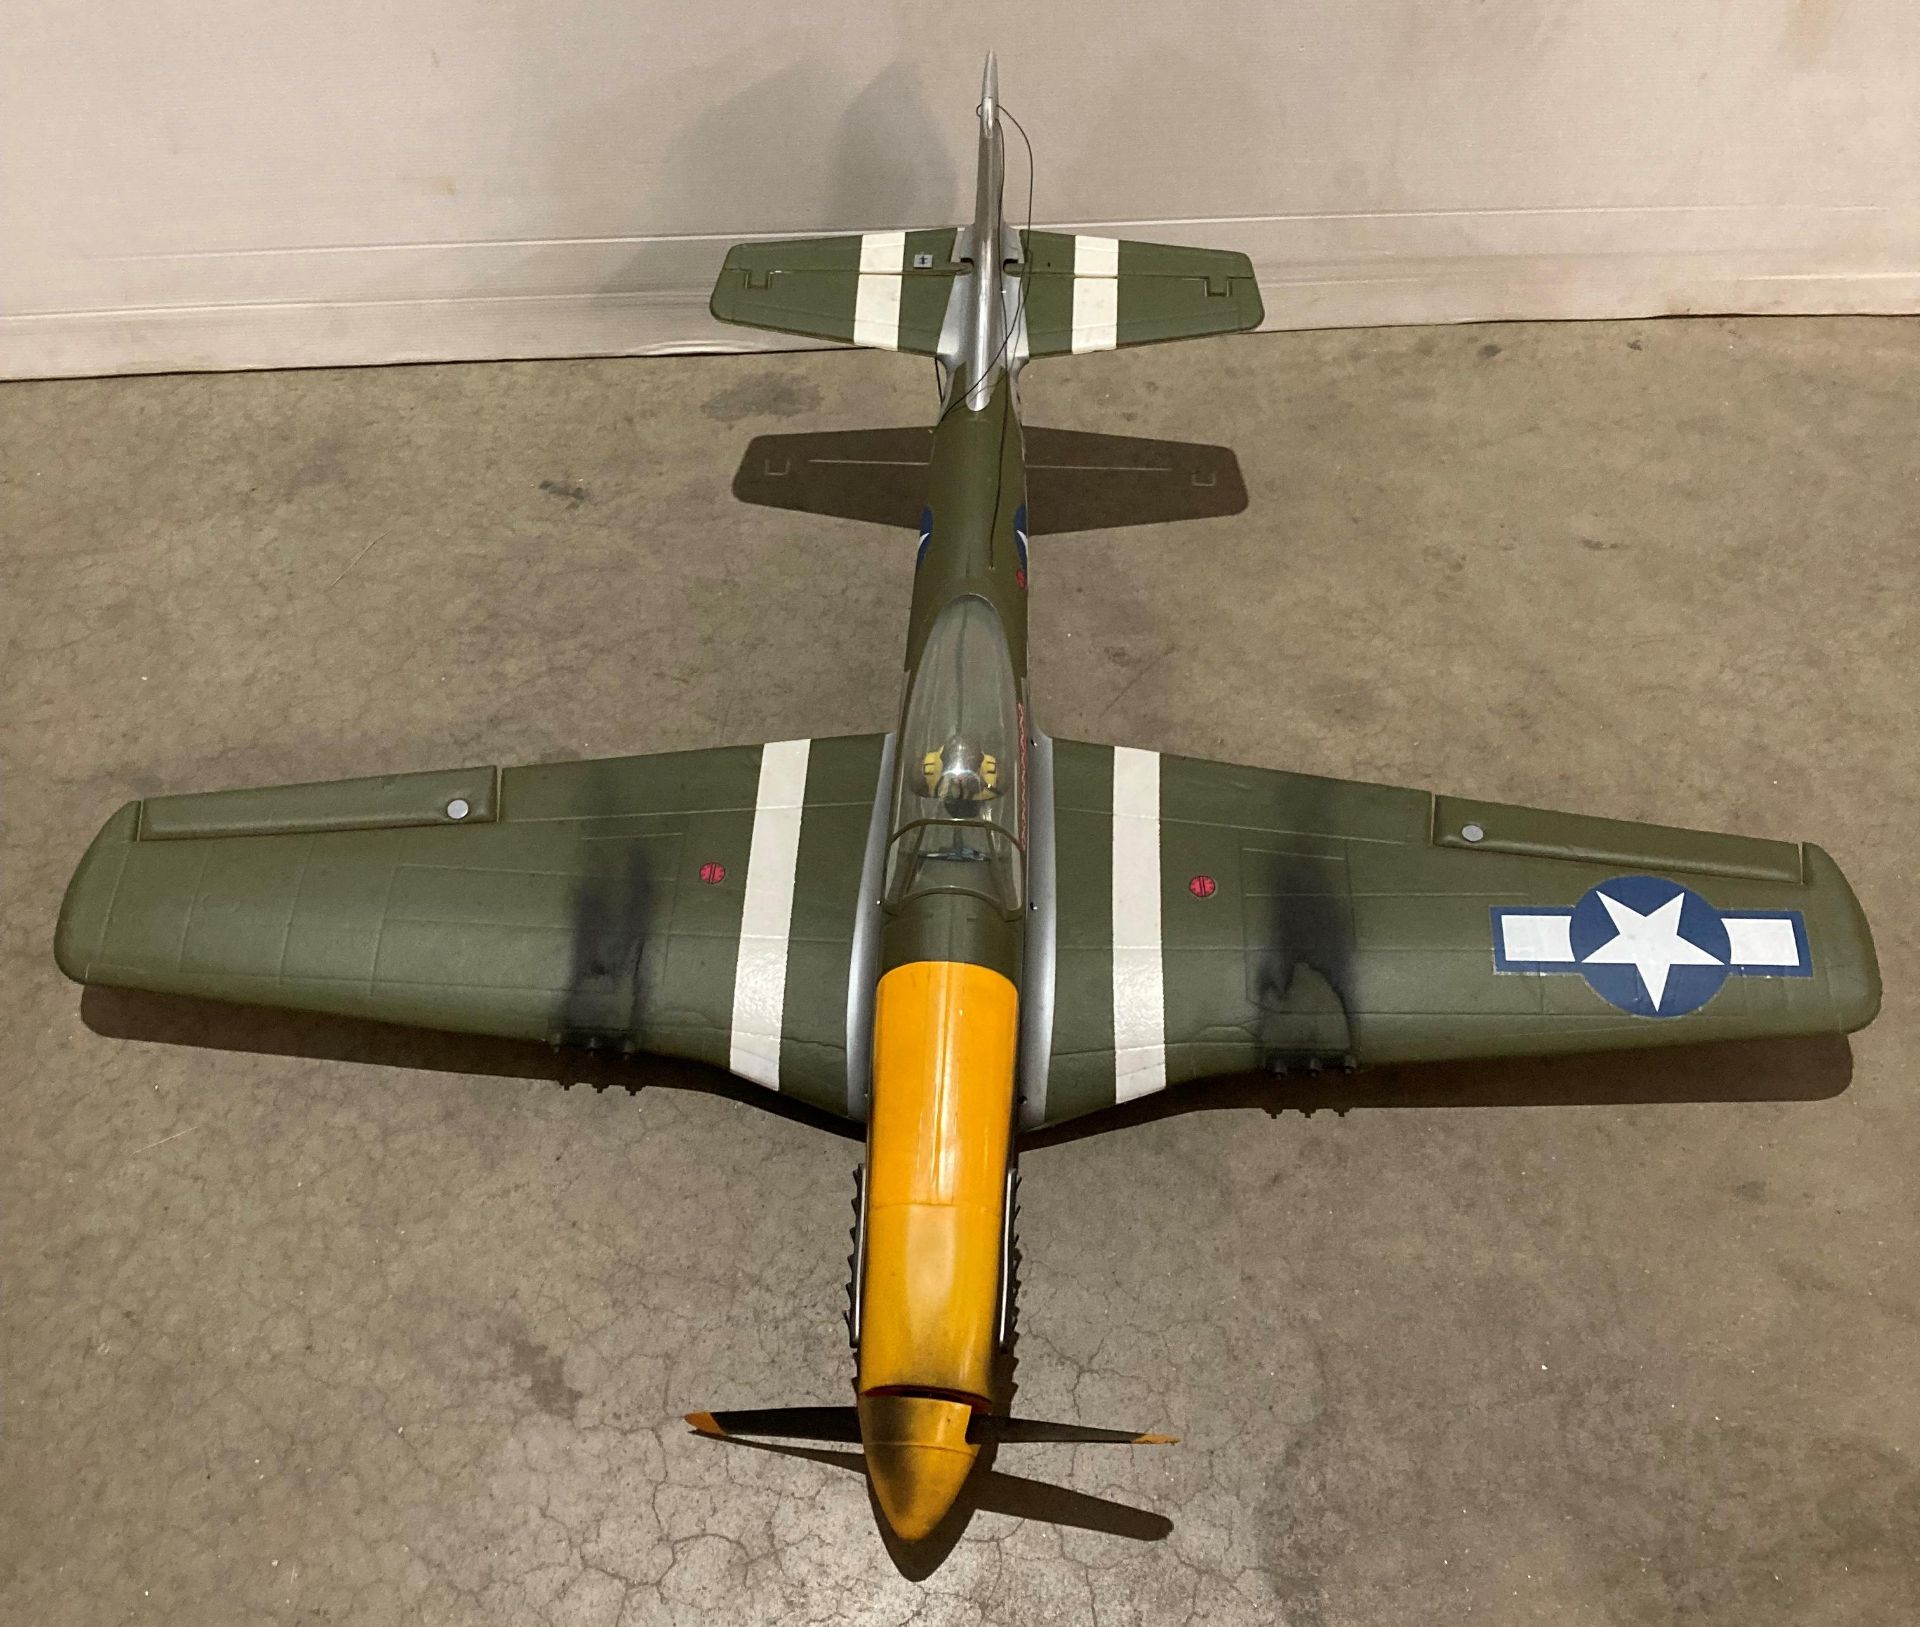 North America P-51 Mustang electric remote controlled model aeroplane (no controller) size 86cm L x